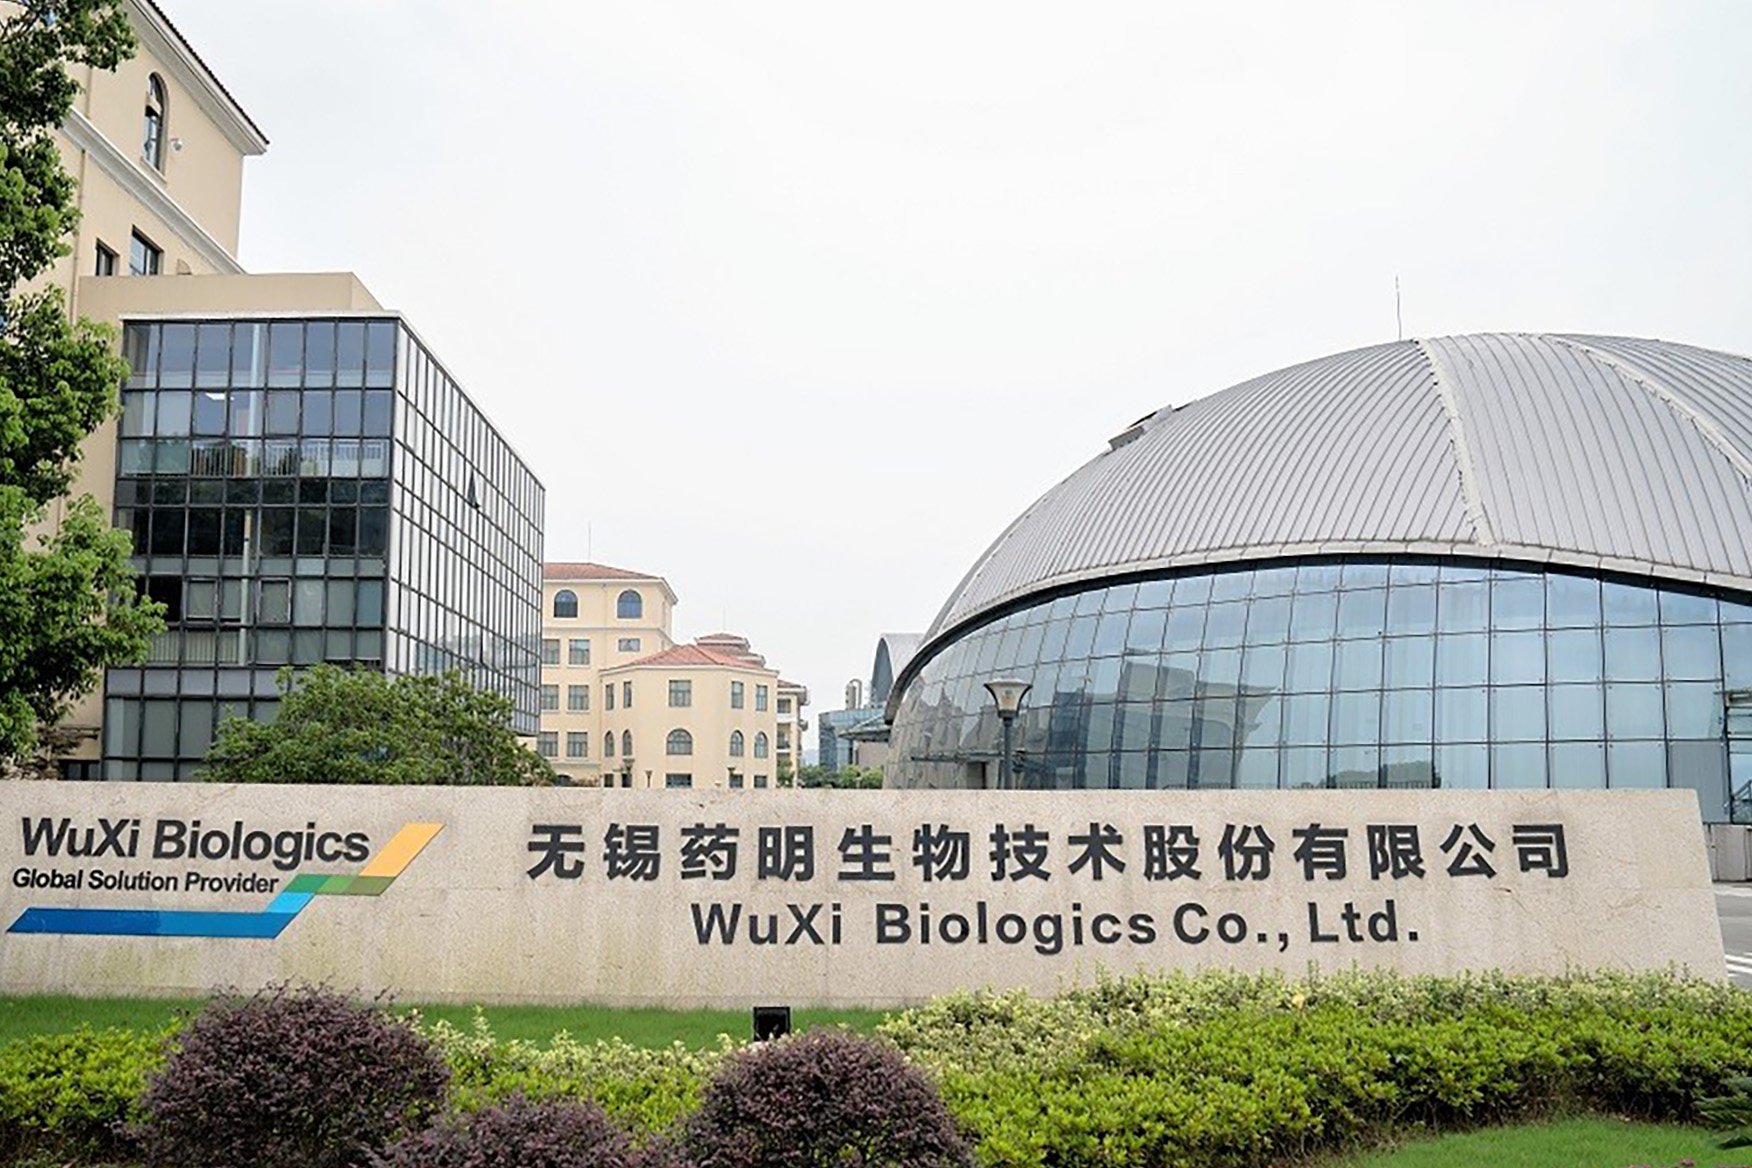 Wuxi Biologics, China site. Wuxi Biologics shares plunged after the US Homeland Security and Governmental Affairs advanced a bill that proposes to prohibit contracting with certain biotechnology providers connected to ‘foreign adversaries’. Photo: Wuxi Biologics